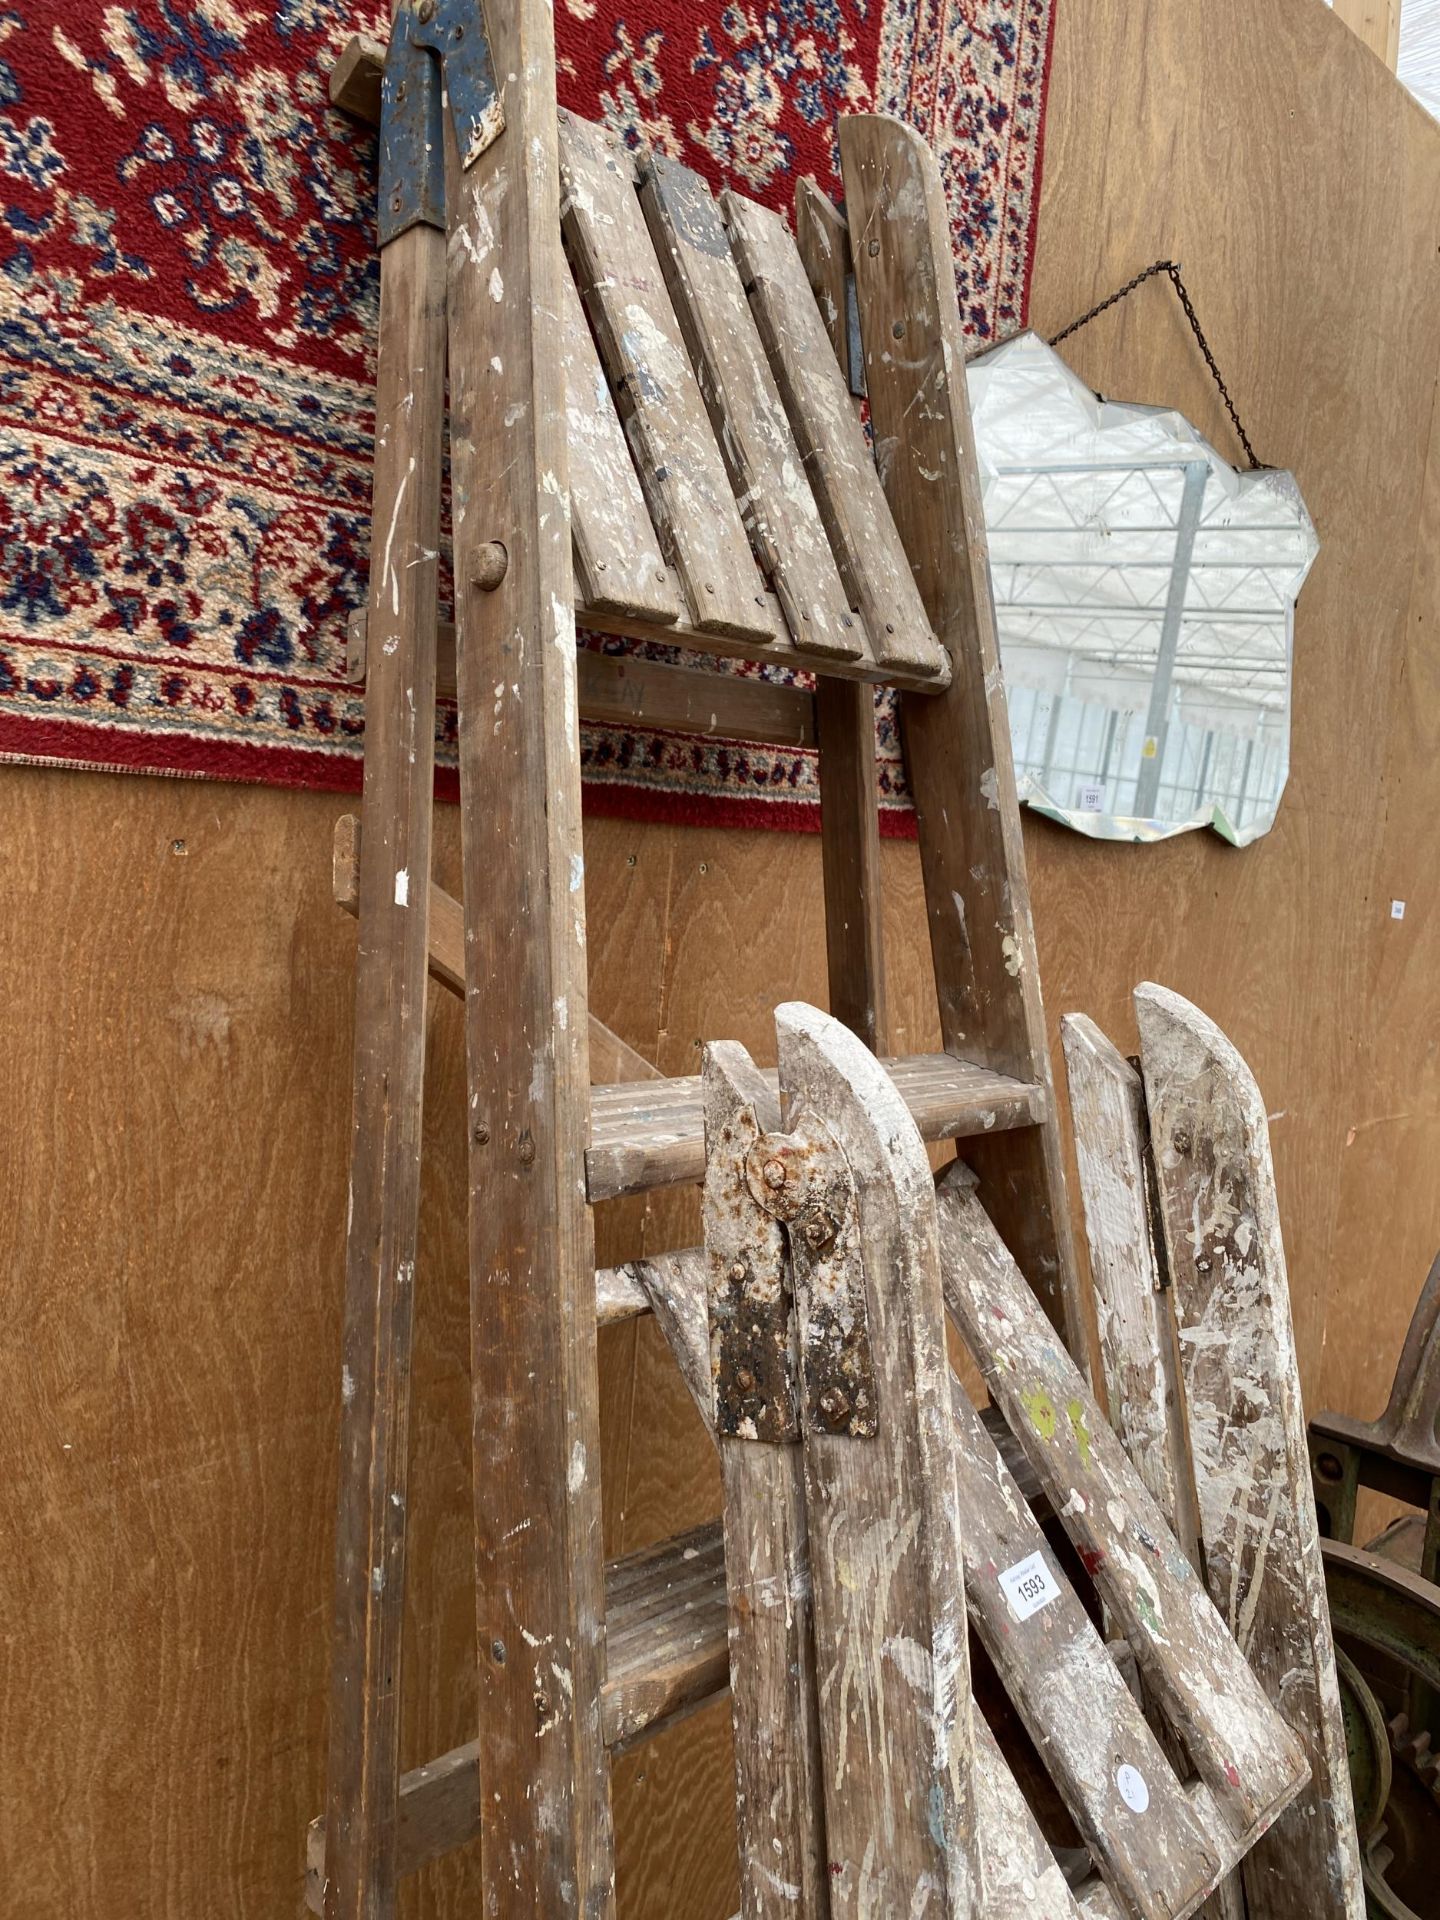 TWO SETS OF VINTAGE WOODEN STEP LADDERS AND A SMALL FOLDING STEP LADDER - Image 3 of 3